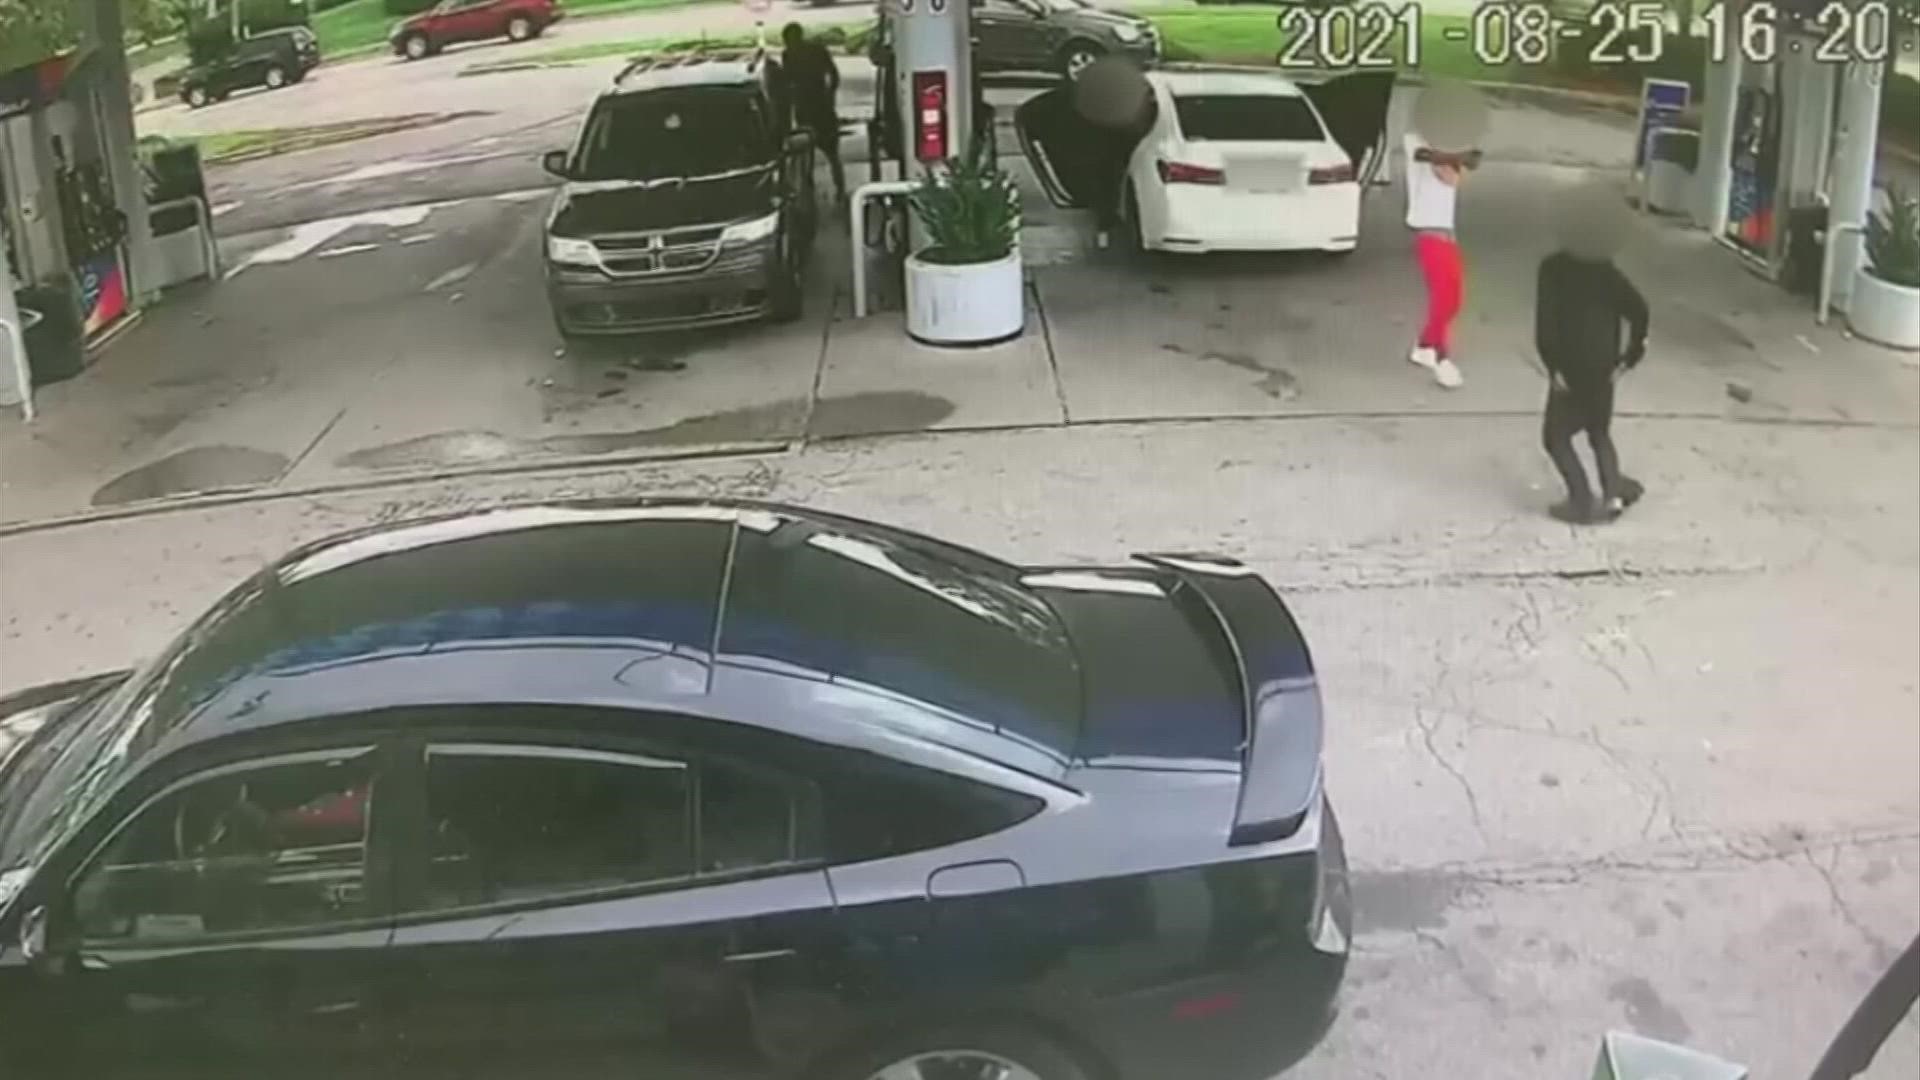 The video shows two teenagers getting outside of a vehicle at a gas station, with one teen shooting the other during a fight.